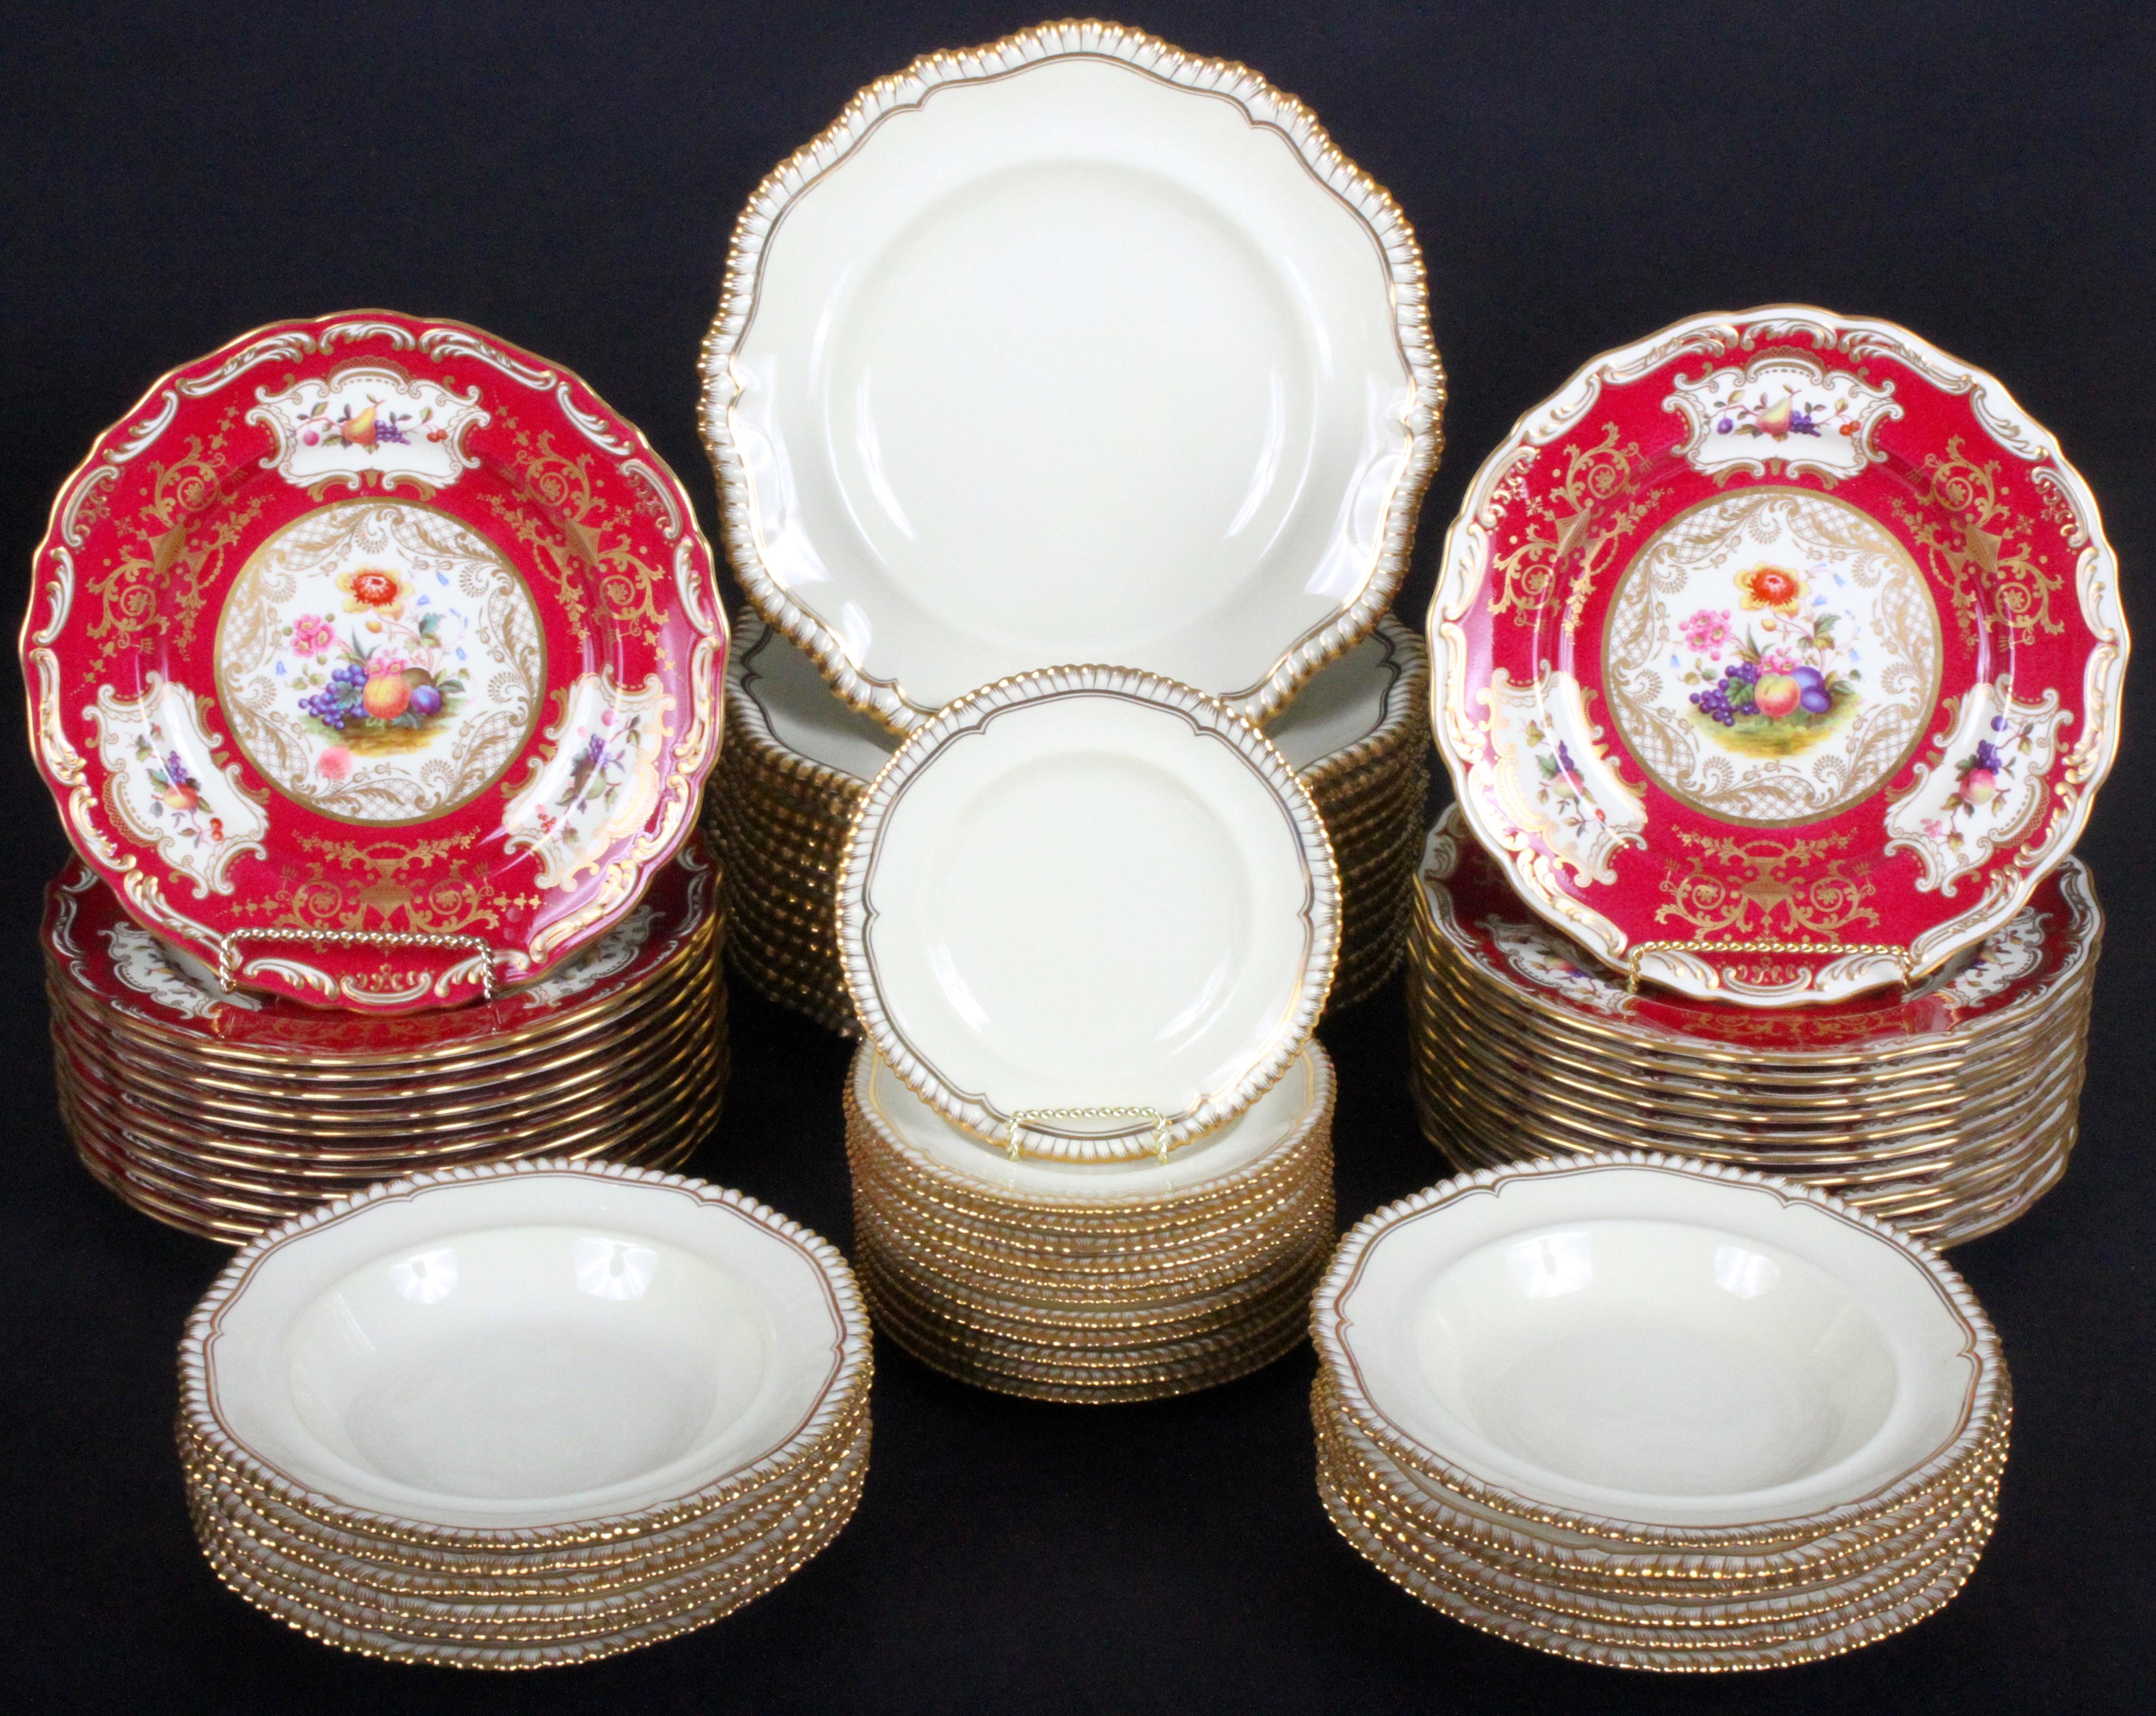 This set of Spode-Copeland plates features reproductions of antique styles from the turn of the century. The set contains 12 each of dinner, salad, dessert, bread and soup for 60 pieces in total. The two sets of prominent red plates are Based Upon